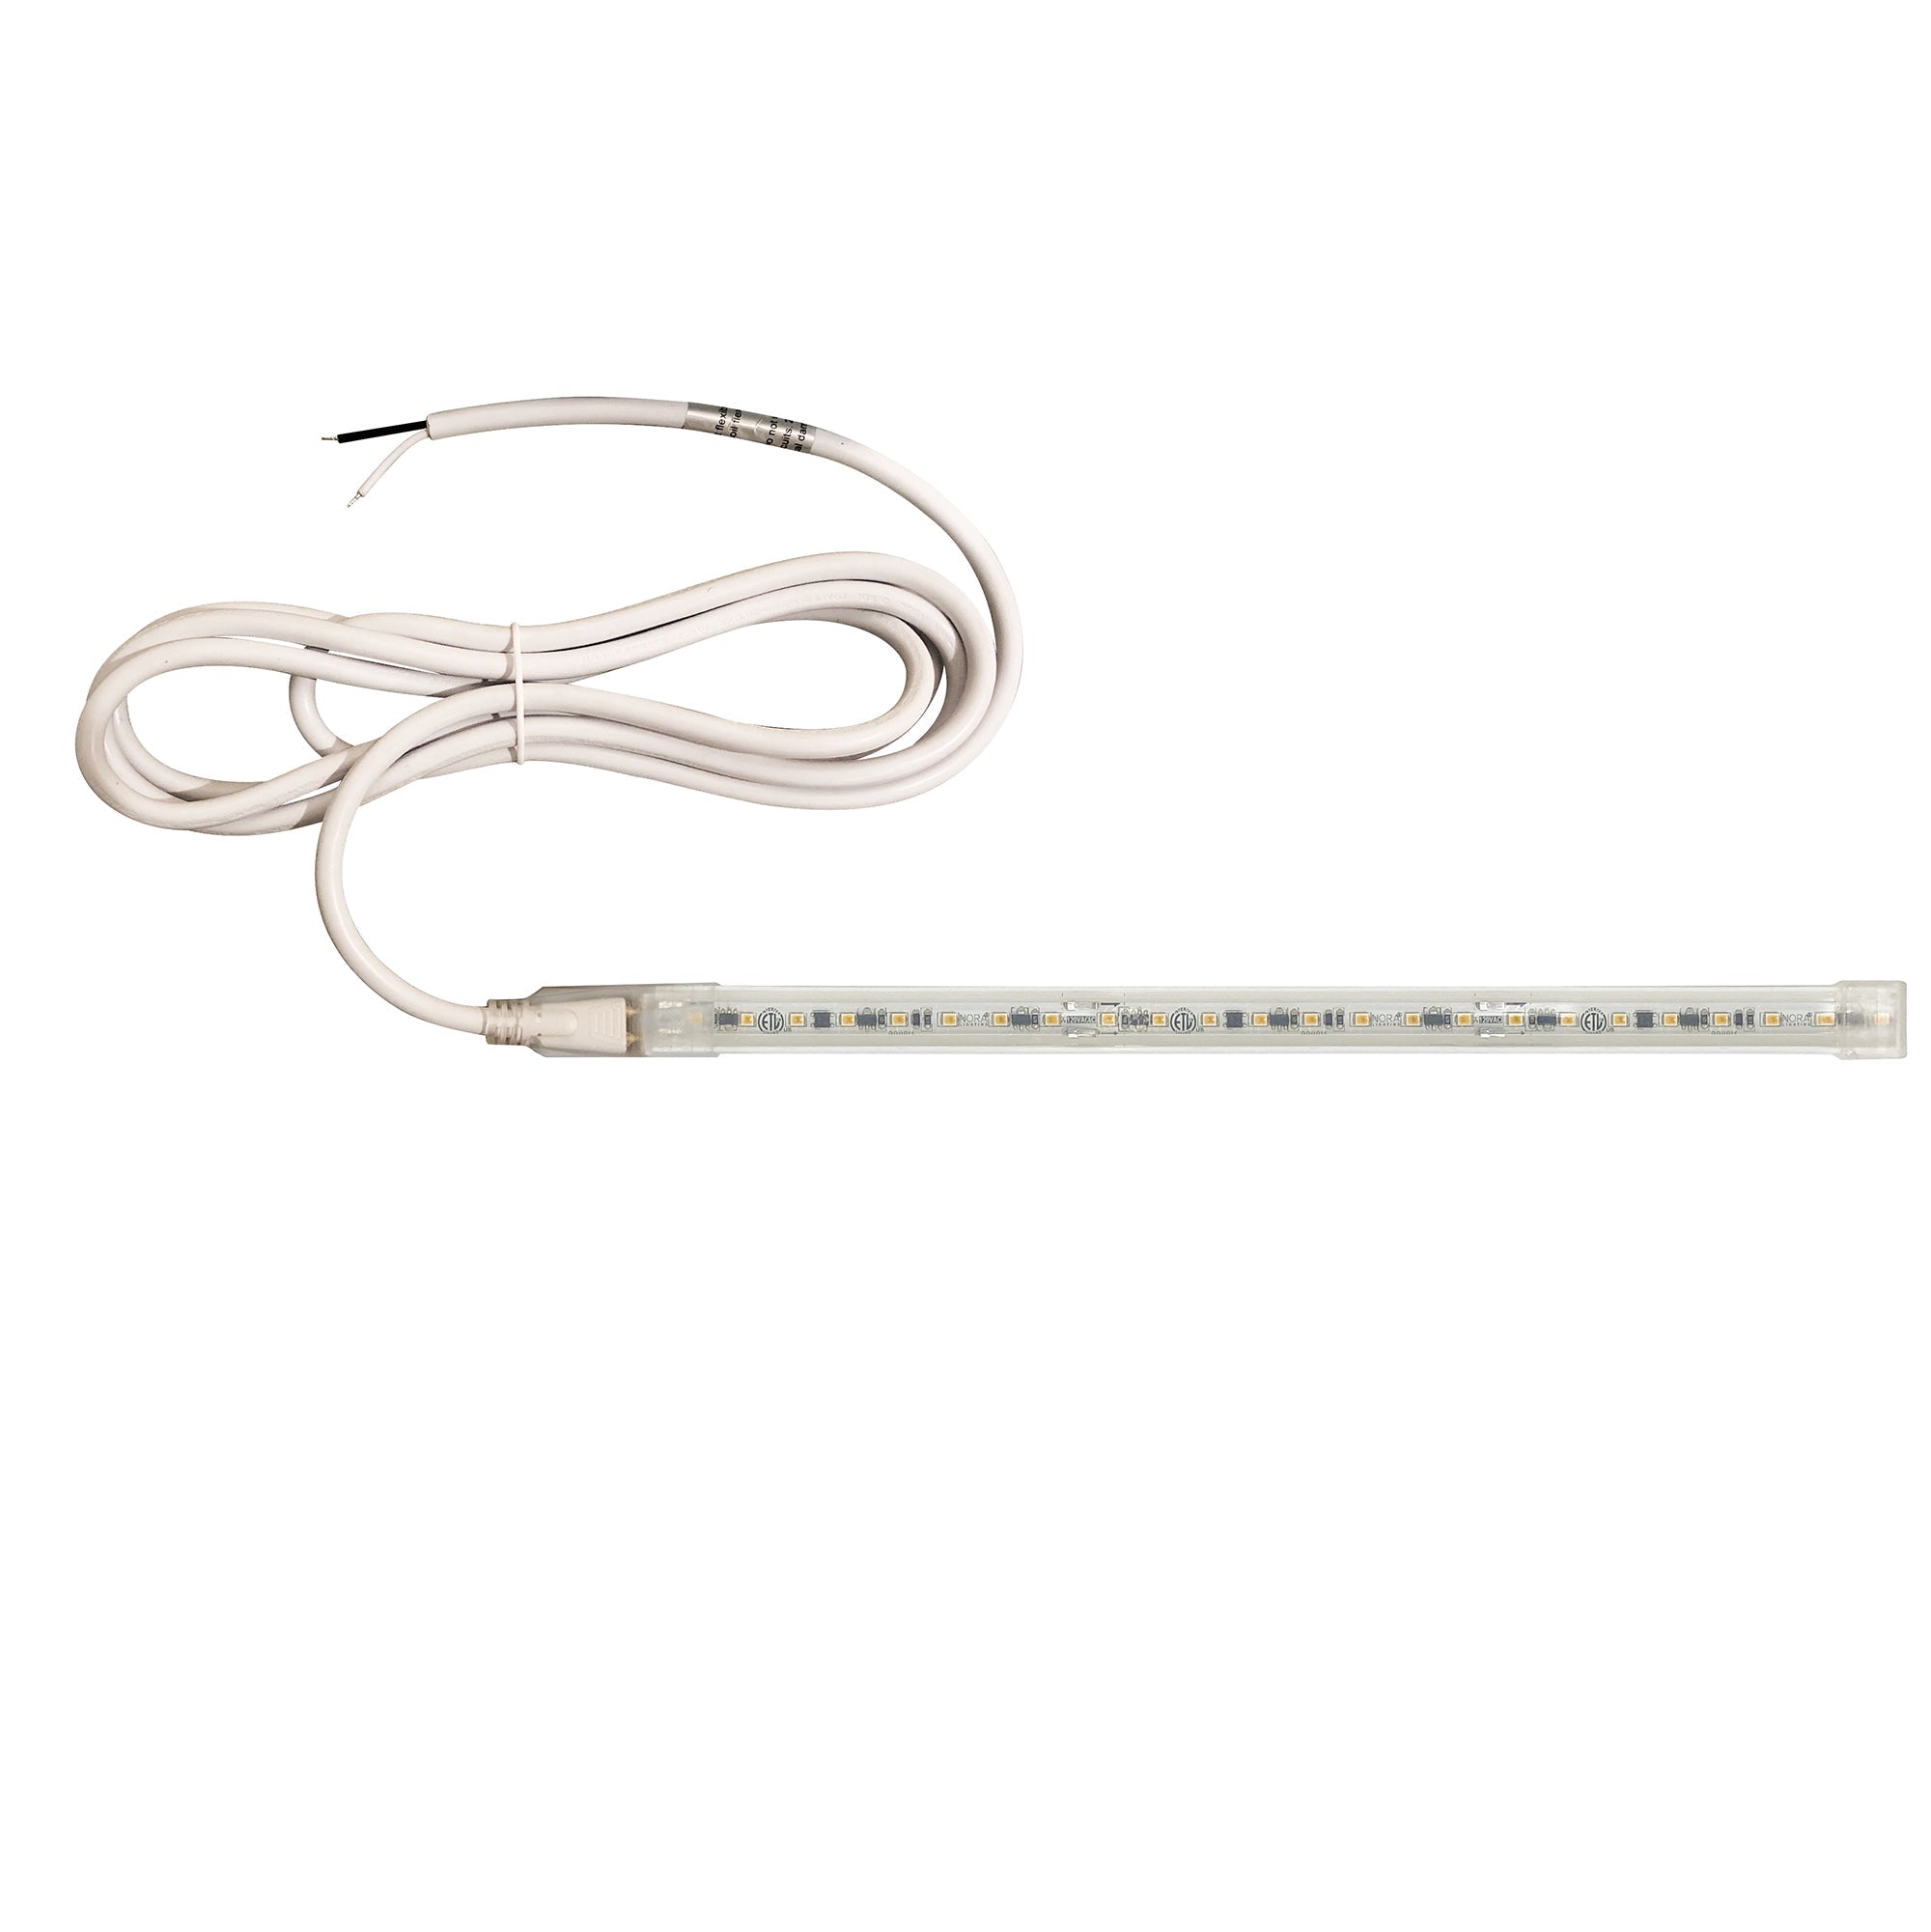 Nora Lighting NUTP13-W61-12-930/HW - Accent / Undercabinet - Custom Cut 61-ft 120V Continuous LED Tape Light, 330lm / 3.6W per foot, 3000K, w/ Mounting Clips and 8' Hardwired Power Cord